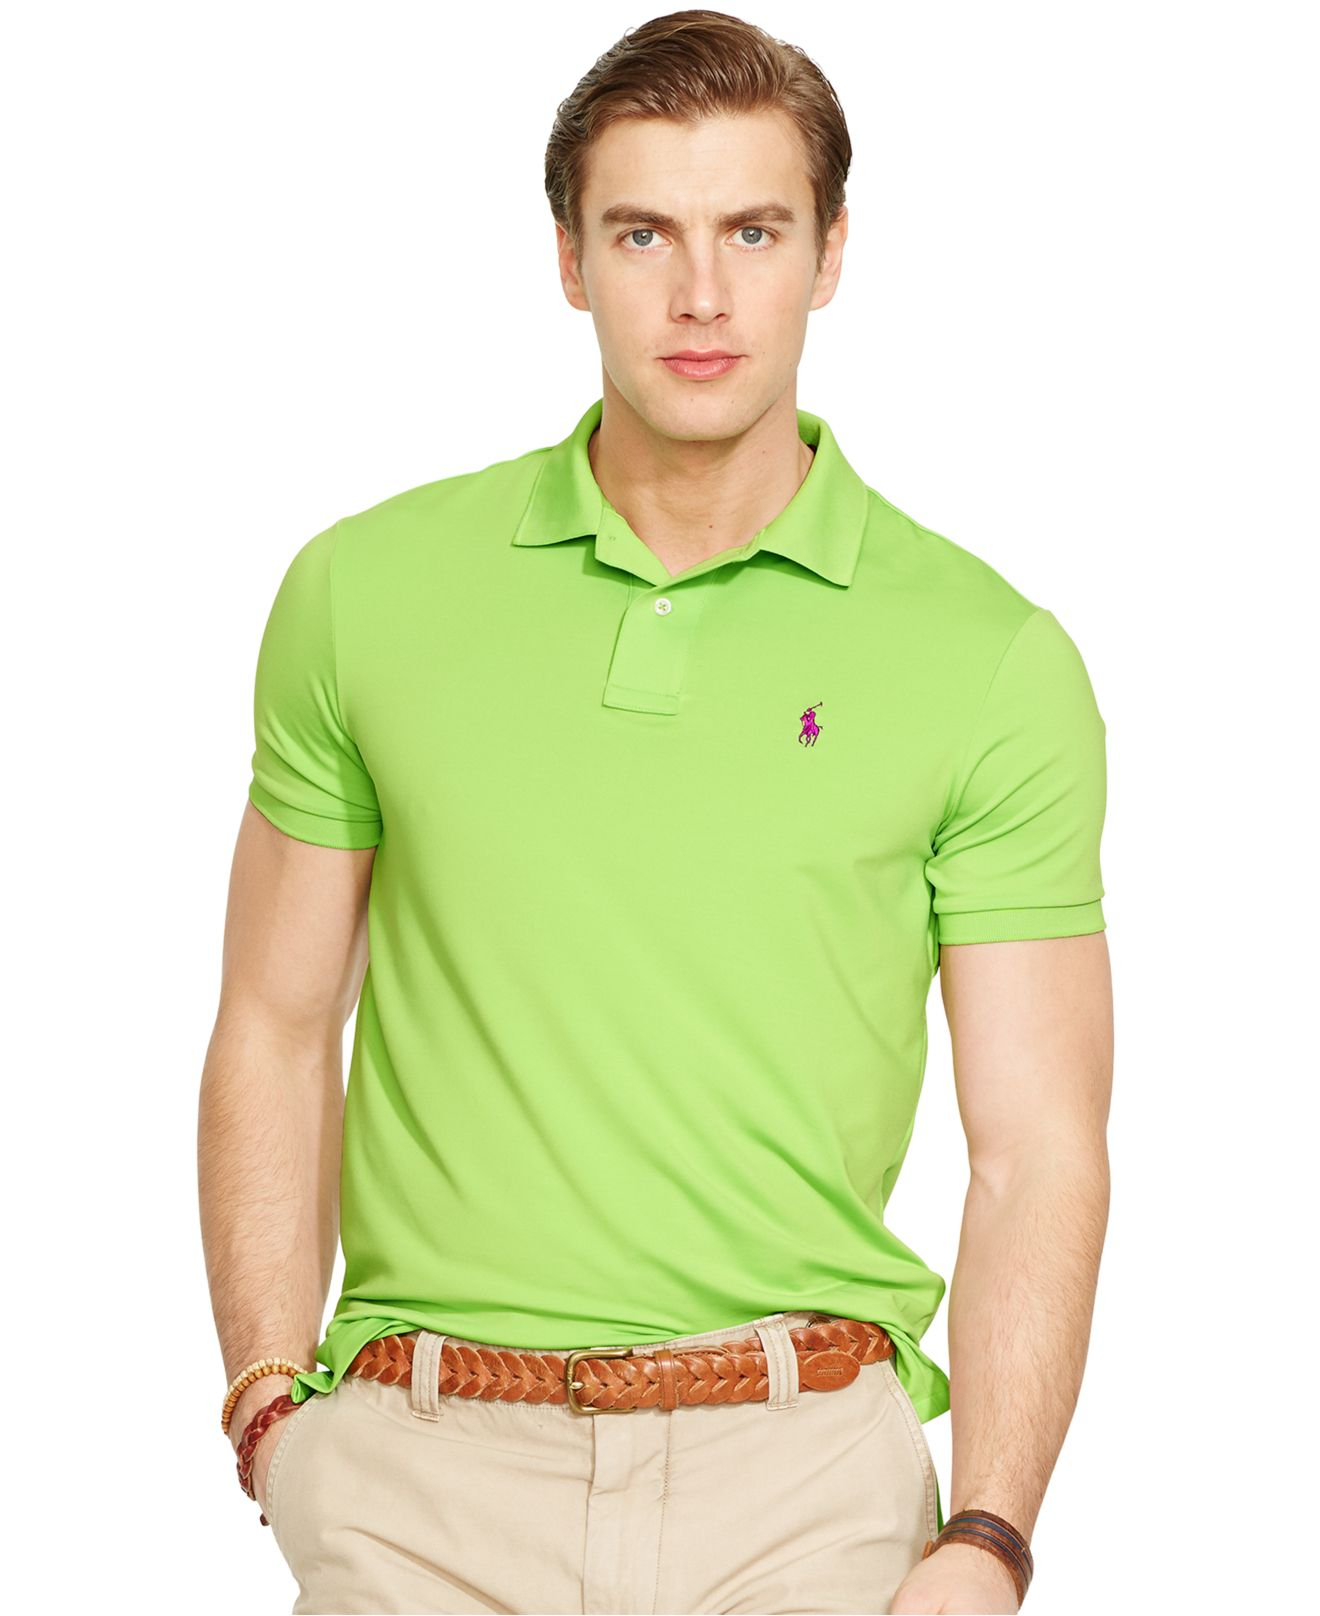 Polo ralph lauren Performance Polo Shirt in Yellow for Men (Citrus Lime ...